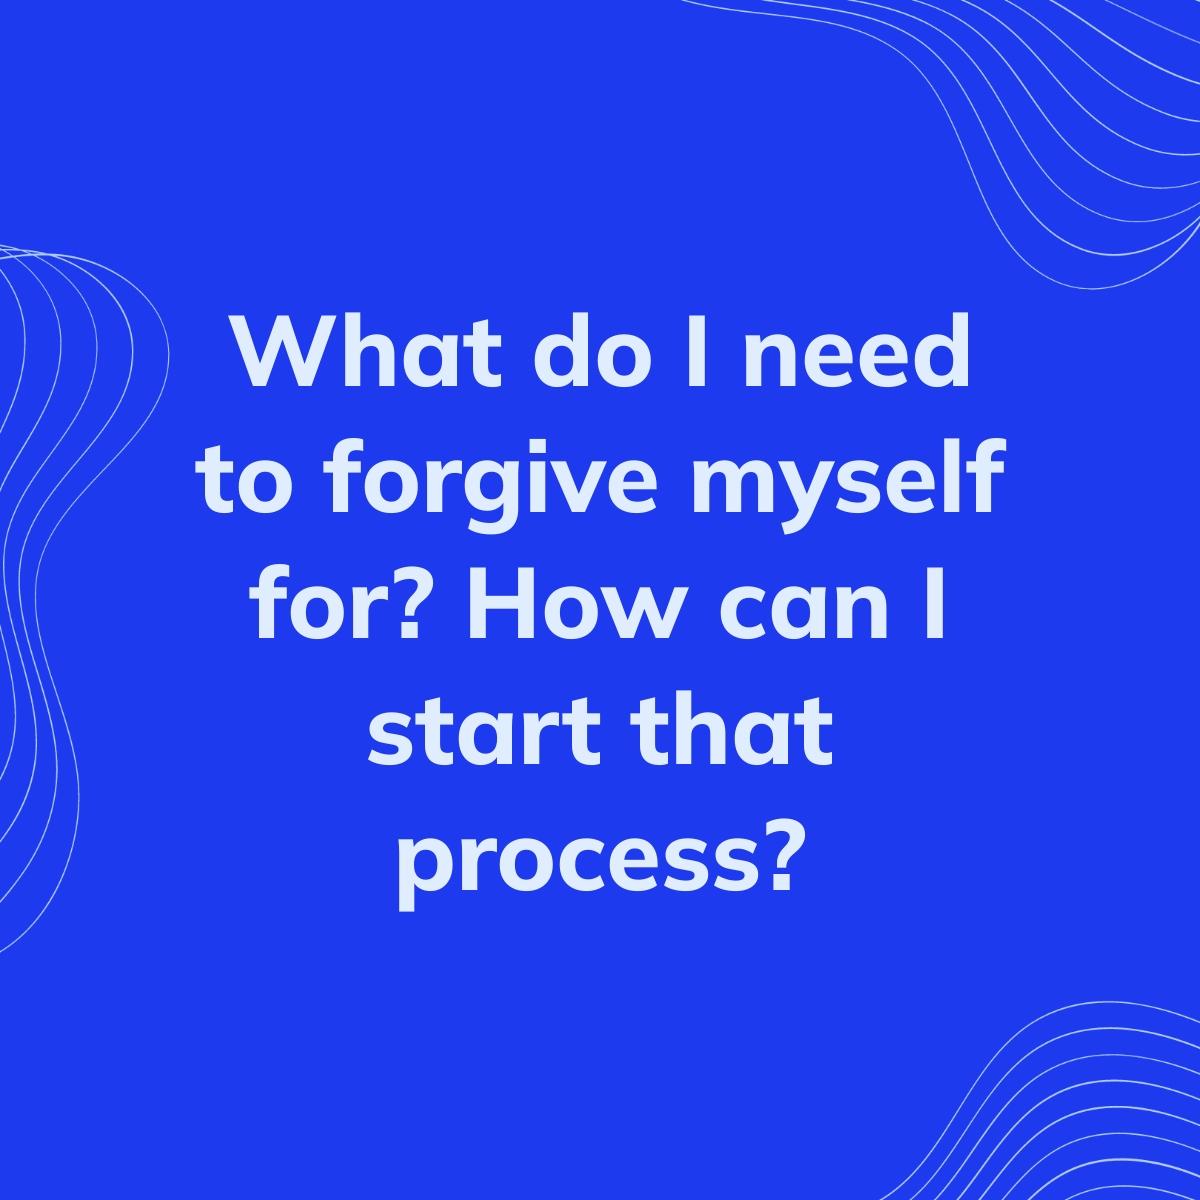 Journal Prompt: What do I need to forgive myself for? How can I start that process?